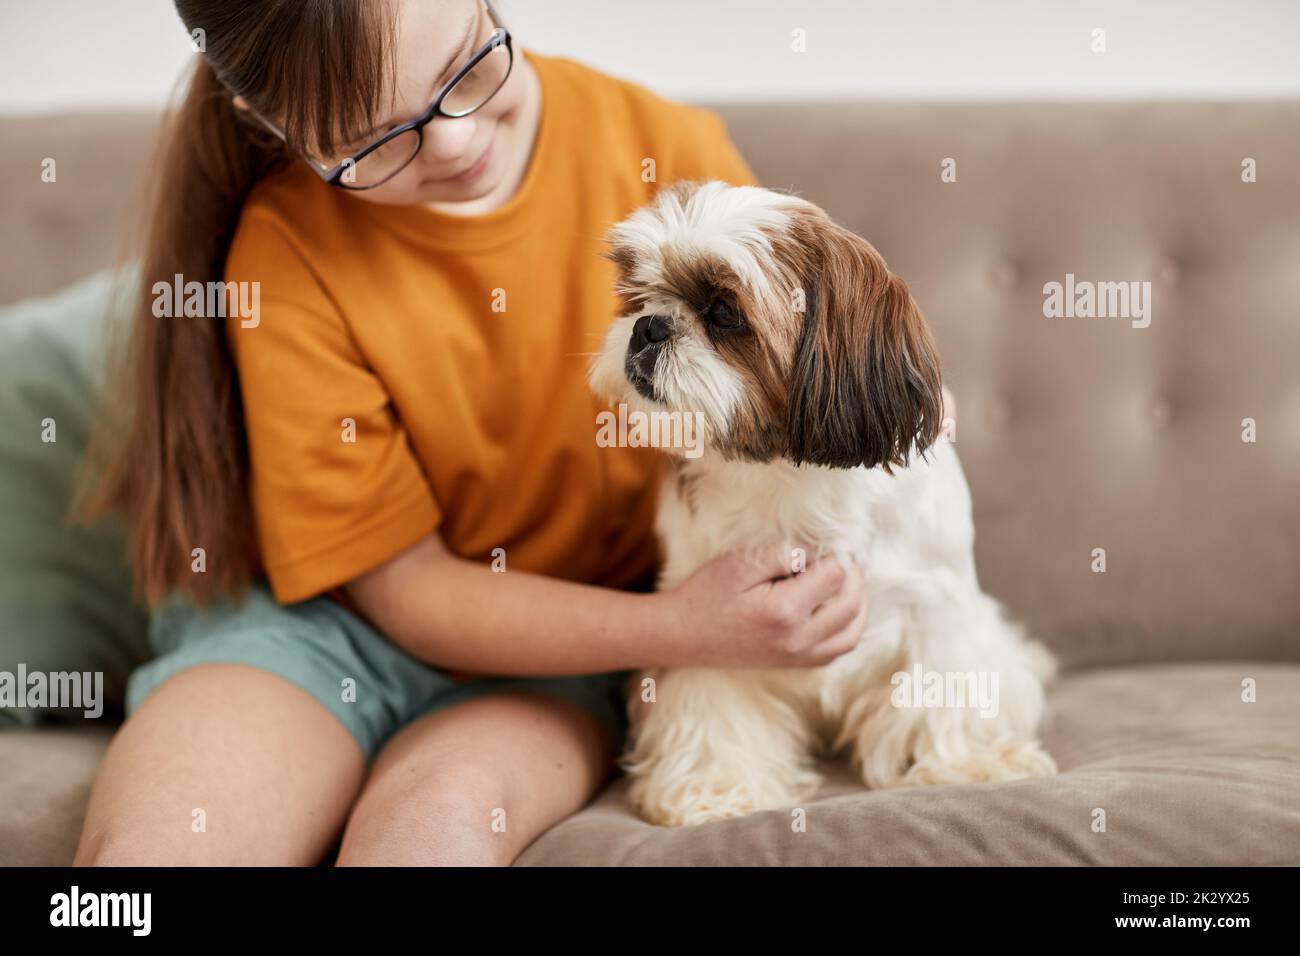 Portrait of cute girl with Down syndrome playing with small dog while sitting on couch together, copy space Stock Photo